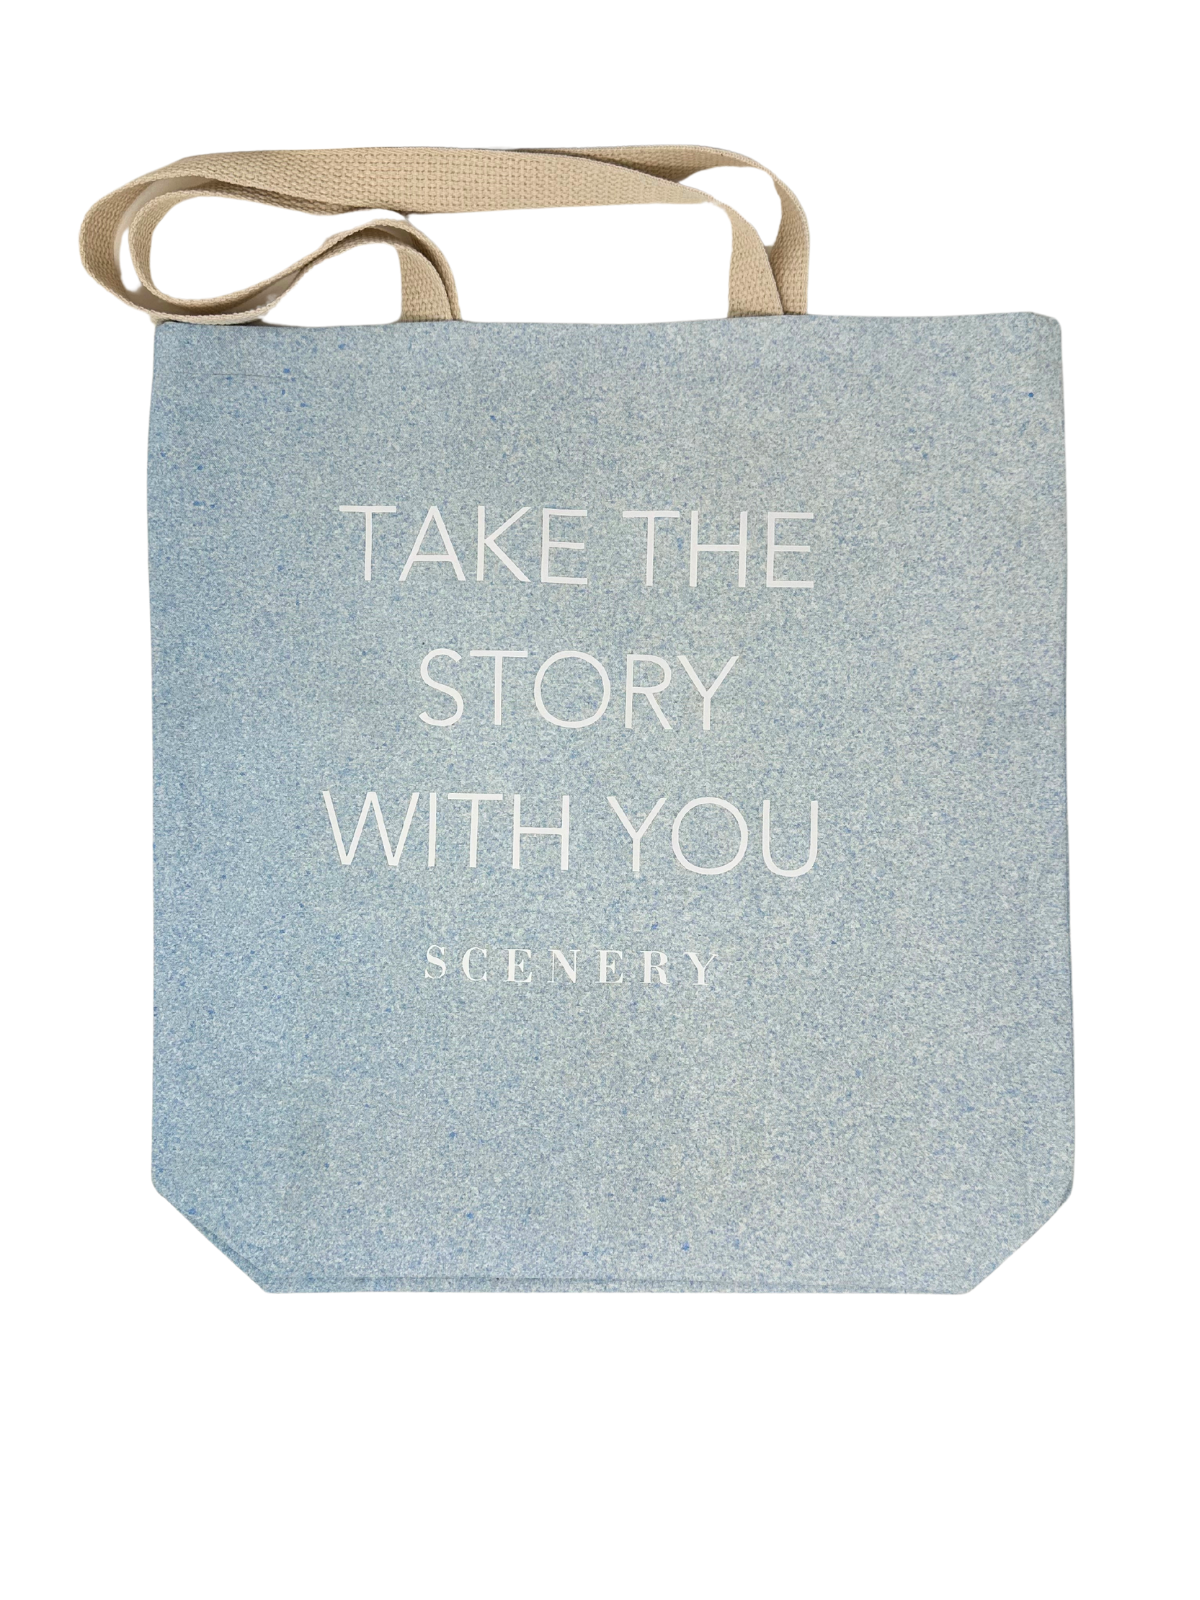 "Take the Story with you" Blue Tote - Scenery